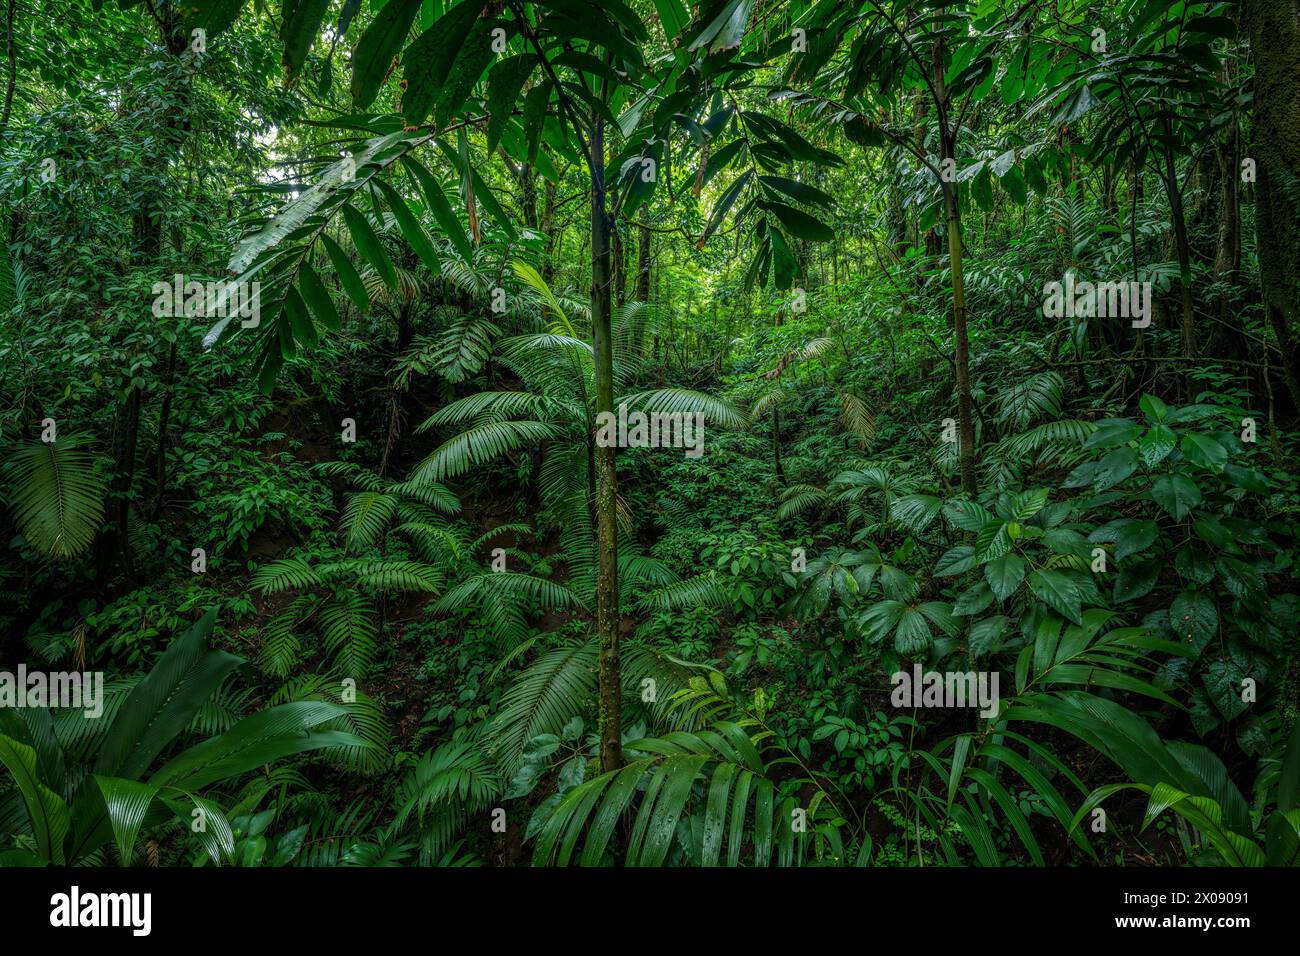 Vibrant and dense foliage of a Costa Rican rainforest, showcasing various shades of green and a multitude of tropical plants. Stock Photo